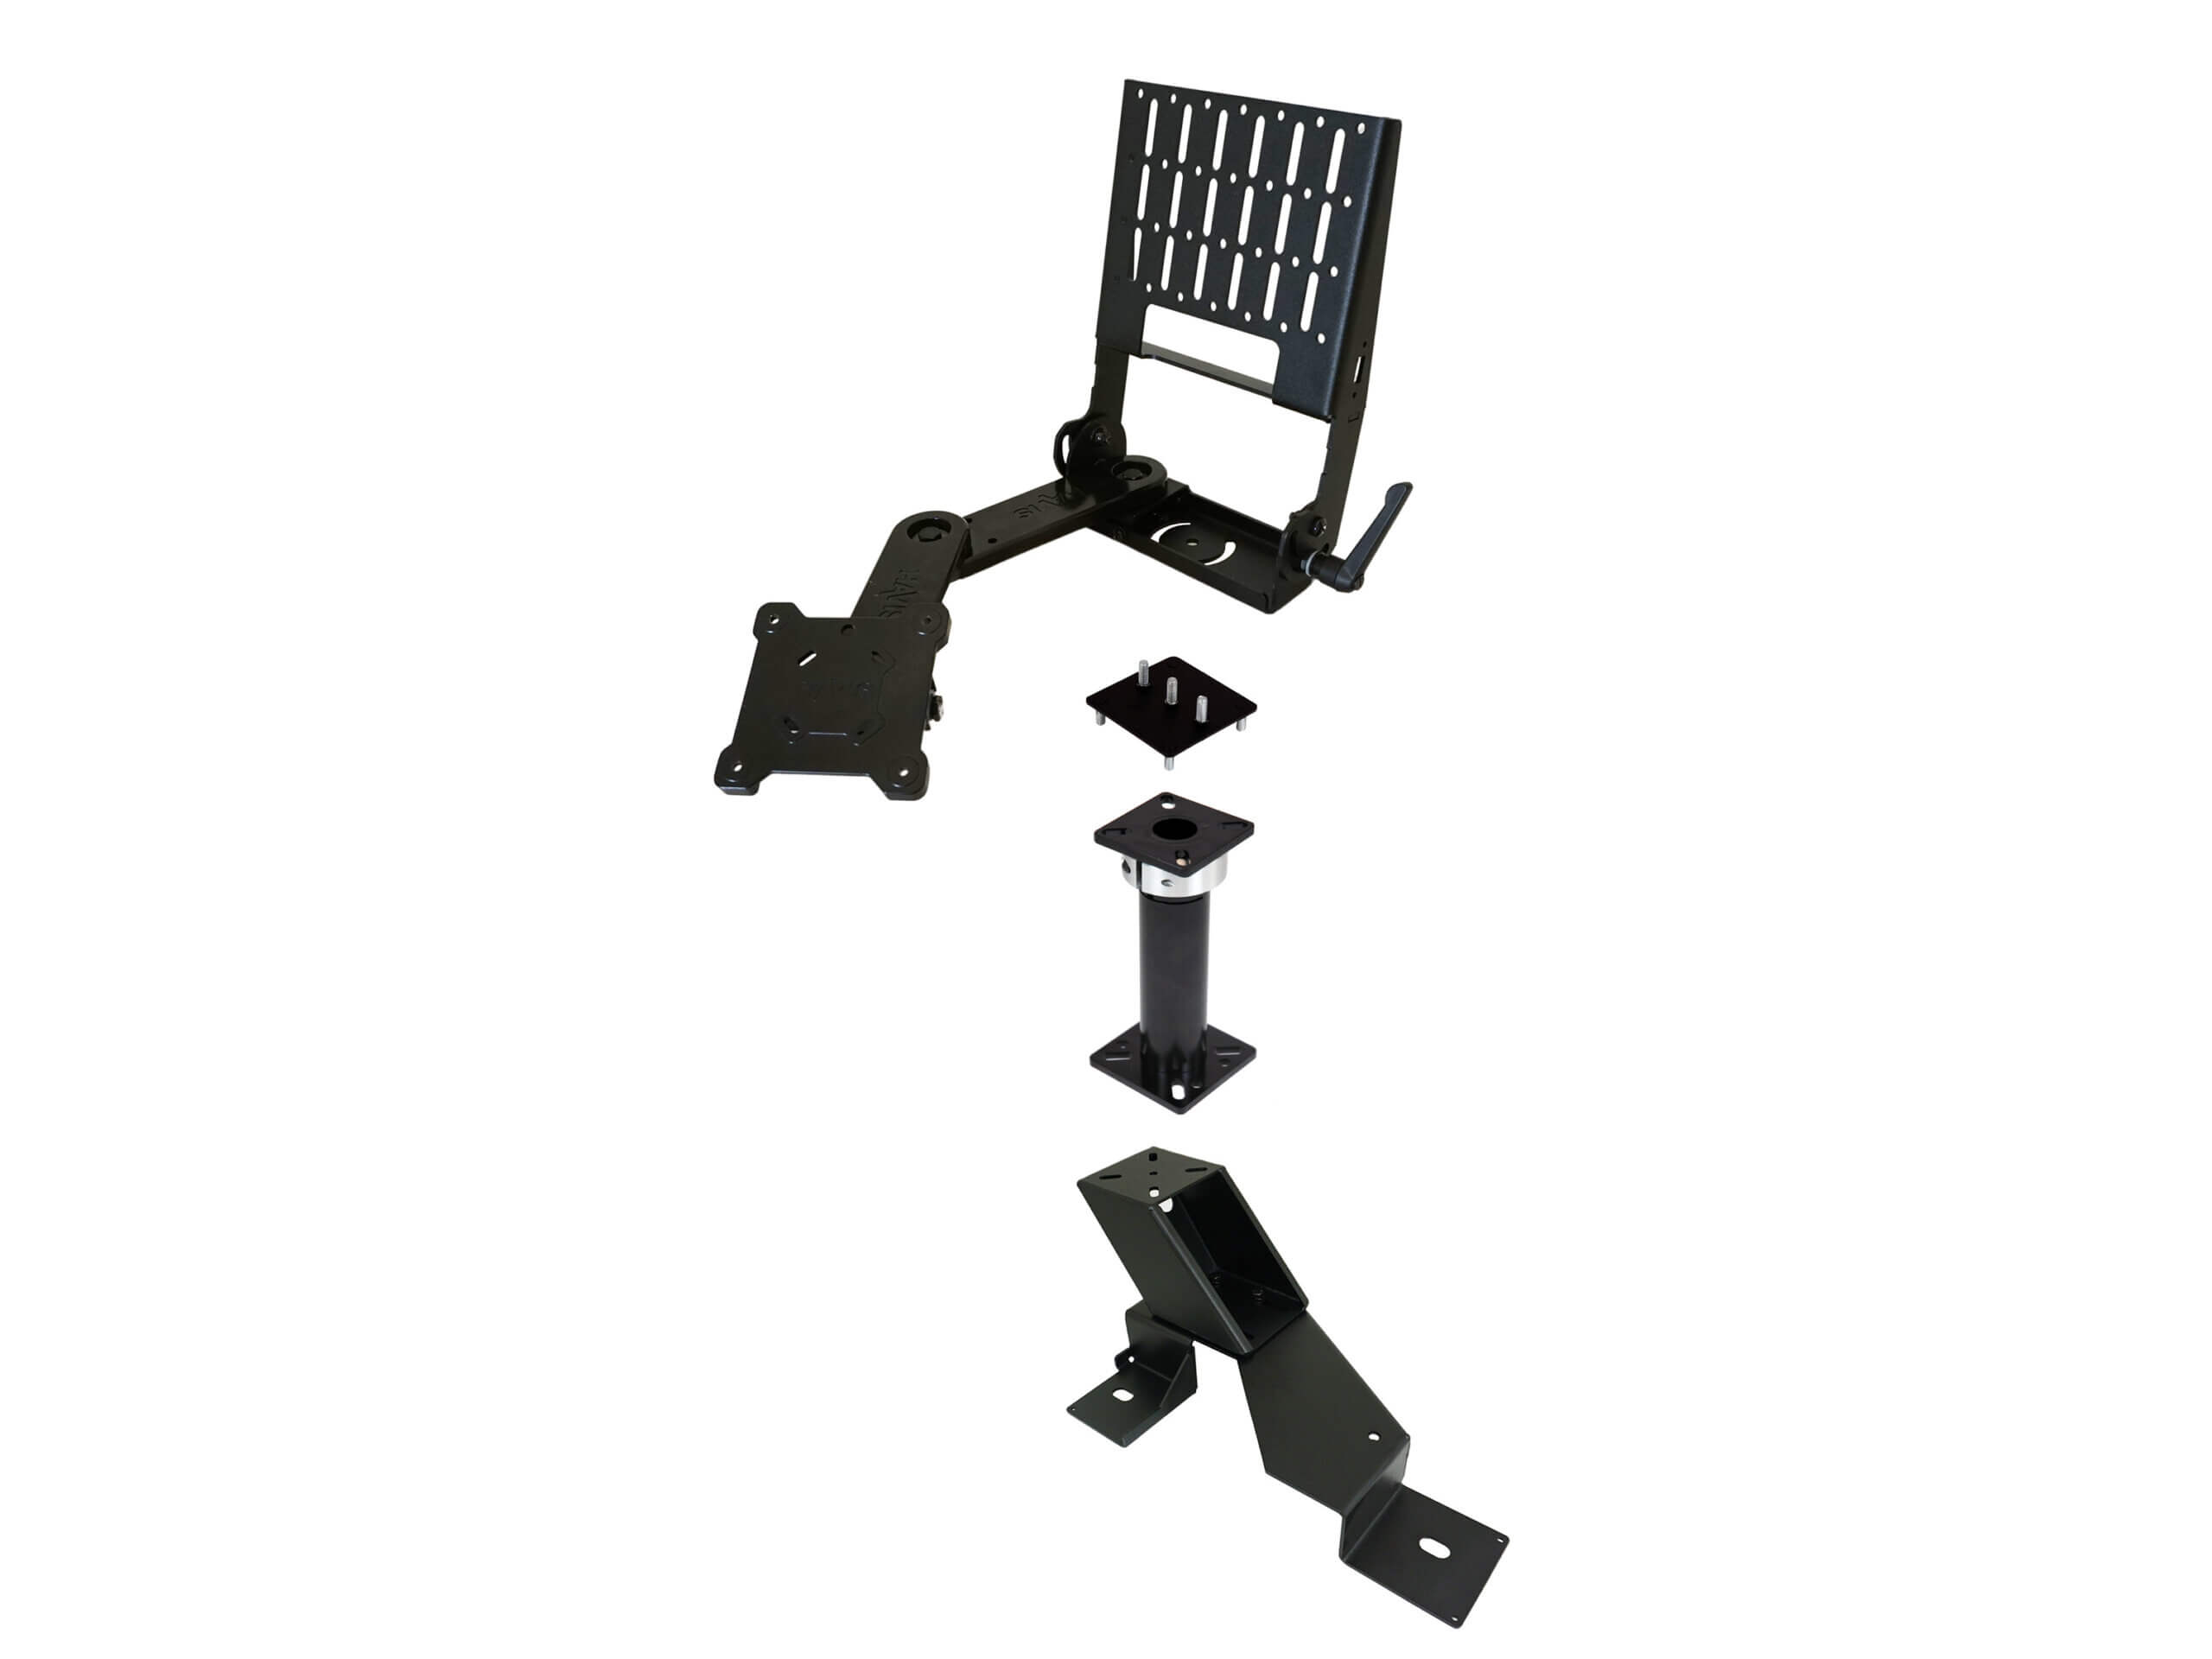 Standard Tablet Pedestal Mount Package For Ford 2018-2023 Expedition, Ford 2015-2023 F-150, 2017-2023 F-250, F-350, F-450, F-250, F-350, F-450, F-550 Chassis Cab, & 2022-2023 Ford F-150 Lightning